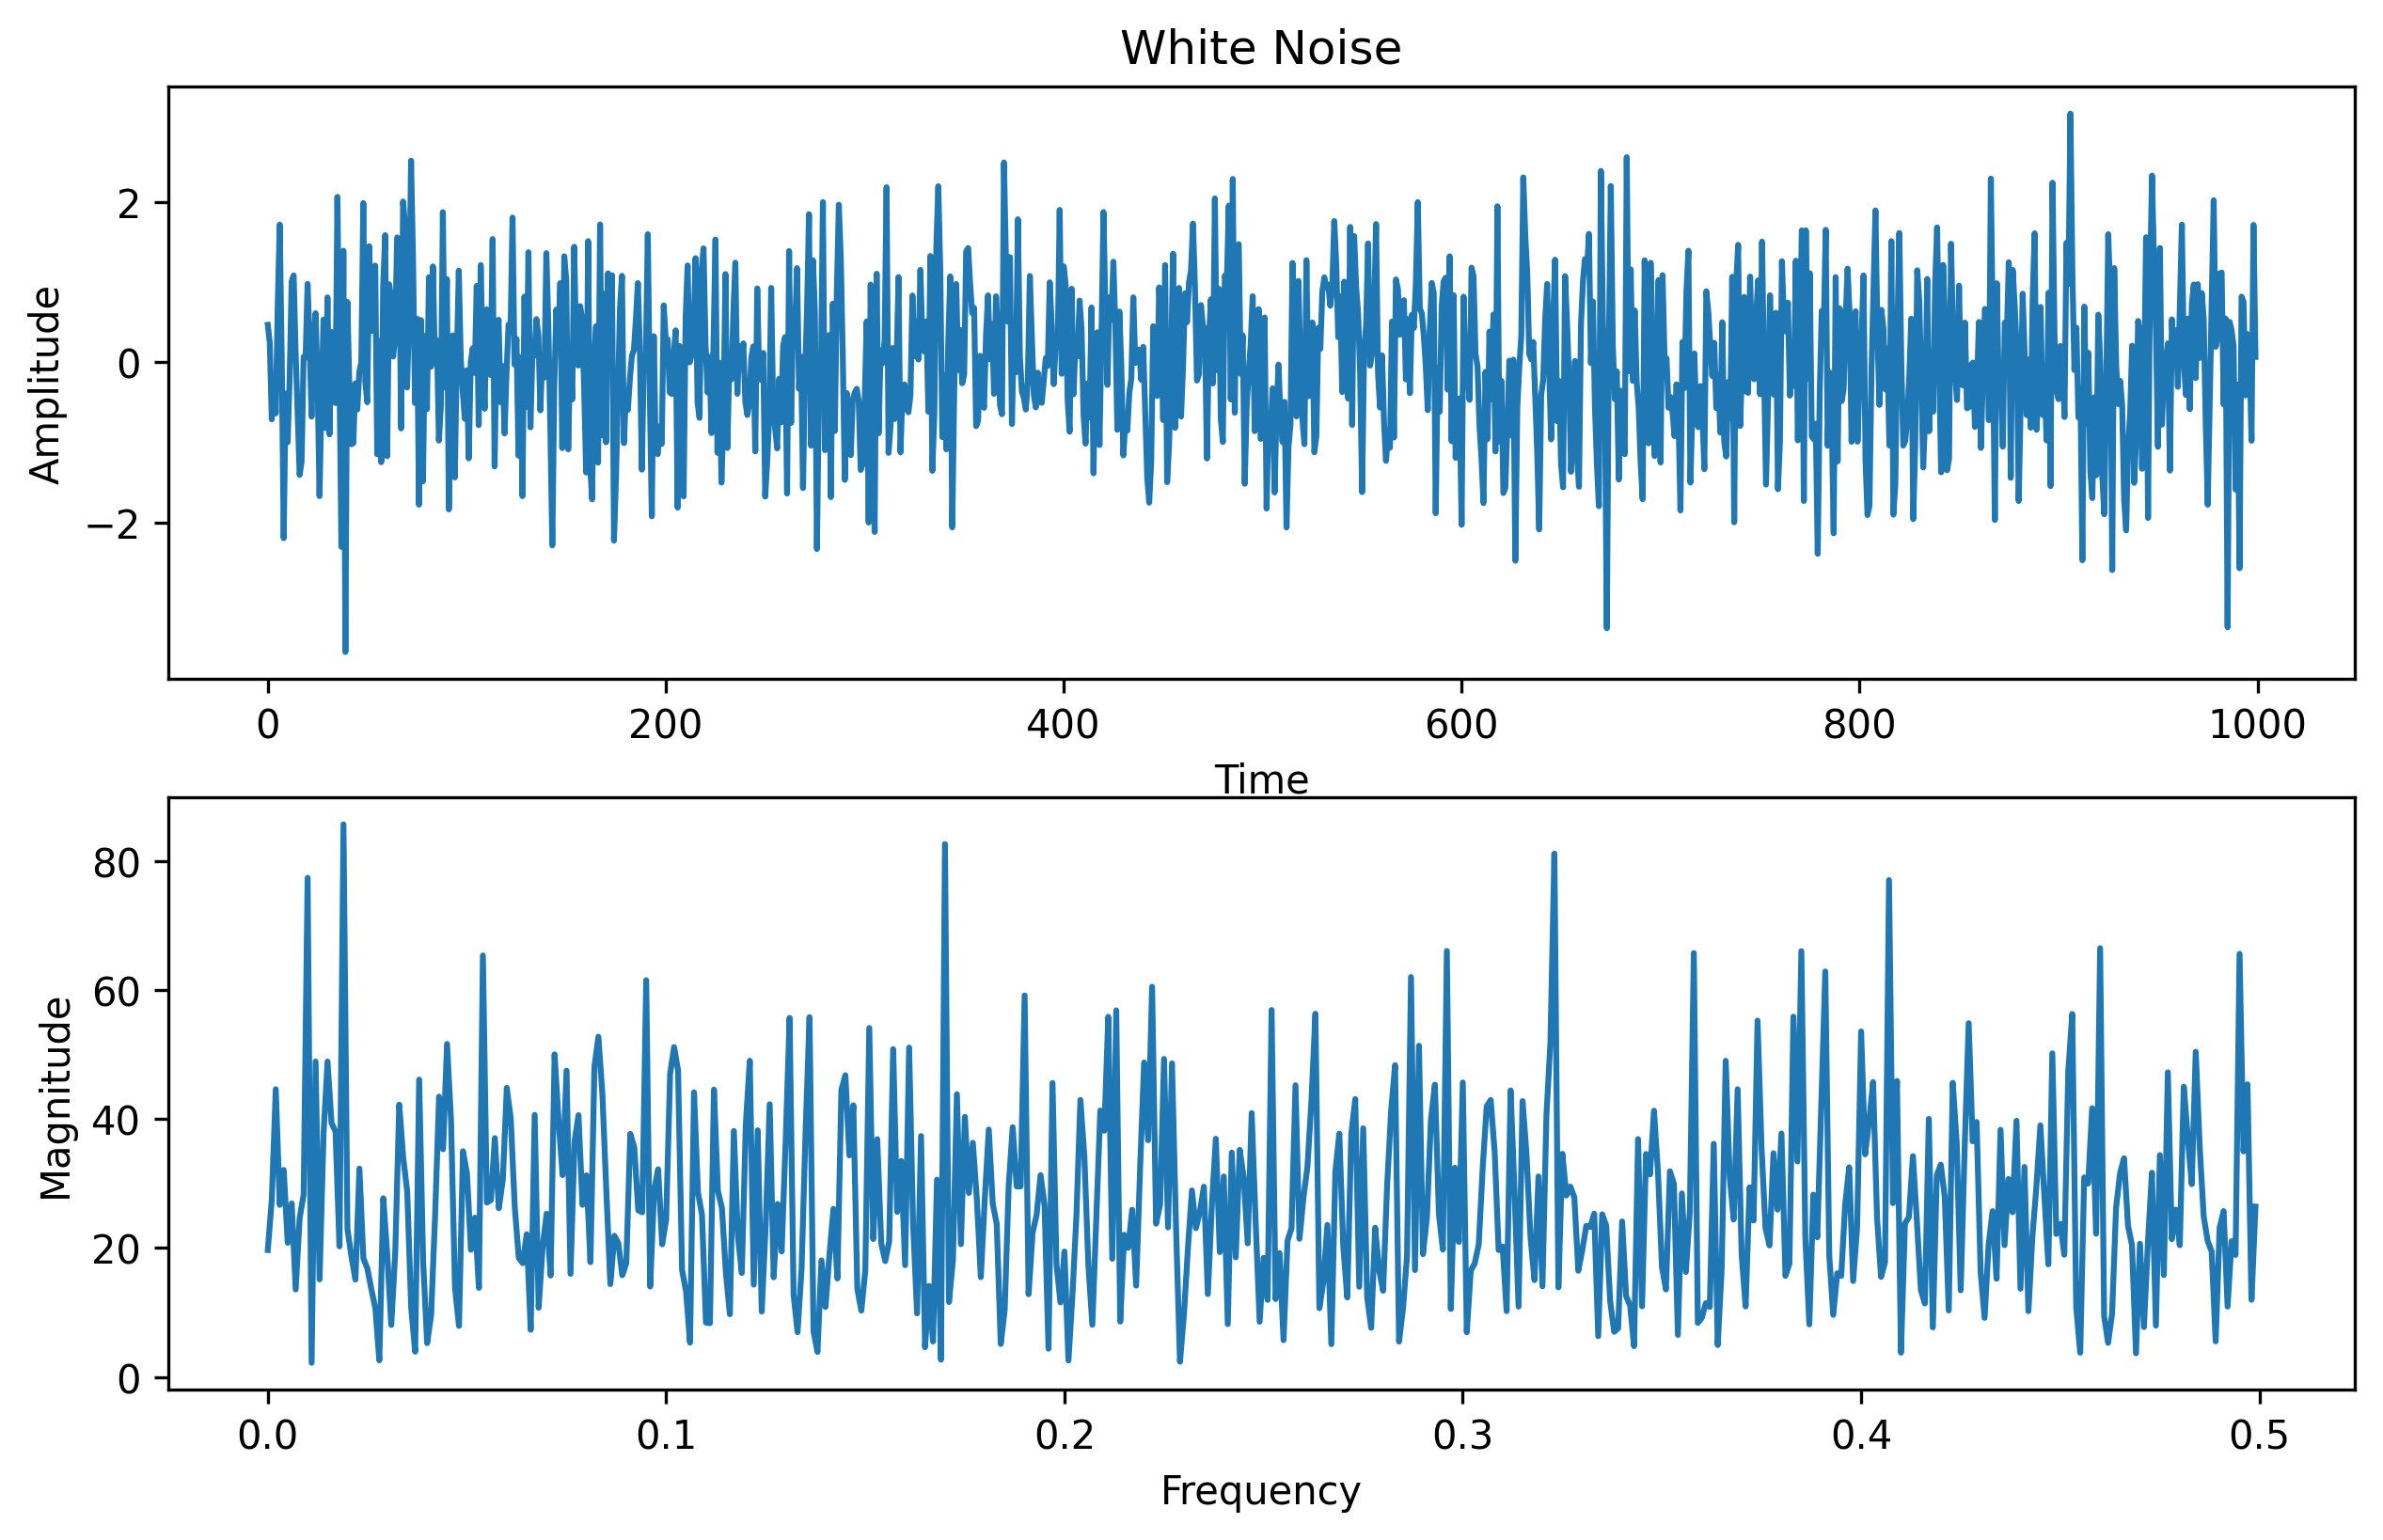 White Noise and its Spectral Content